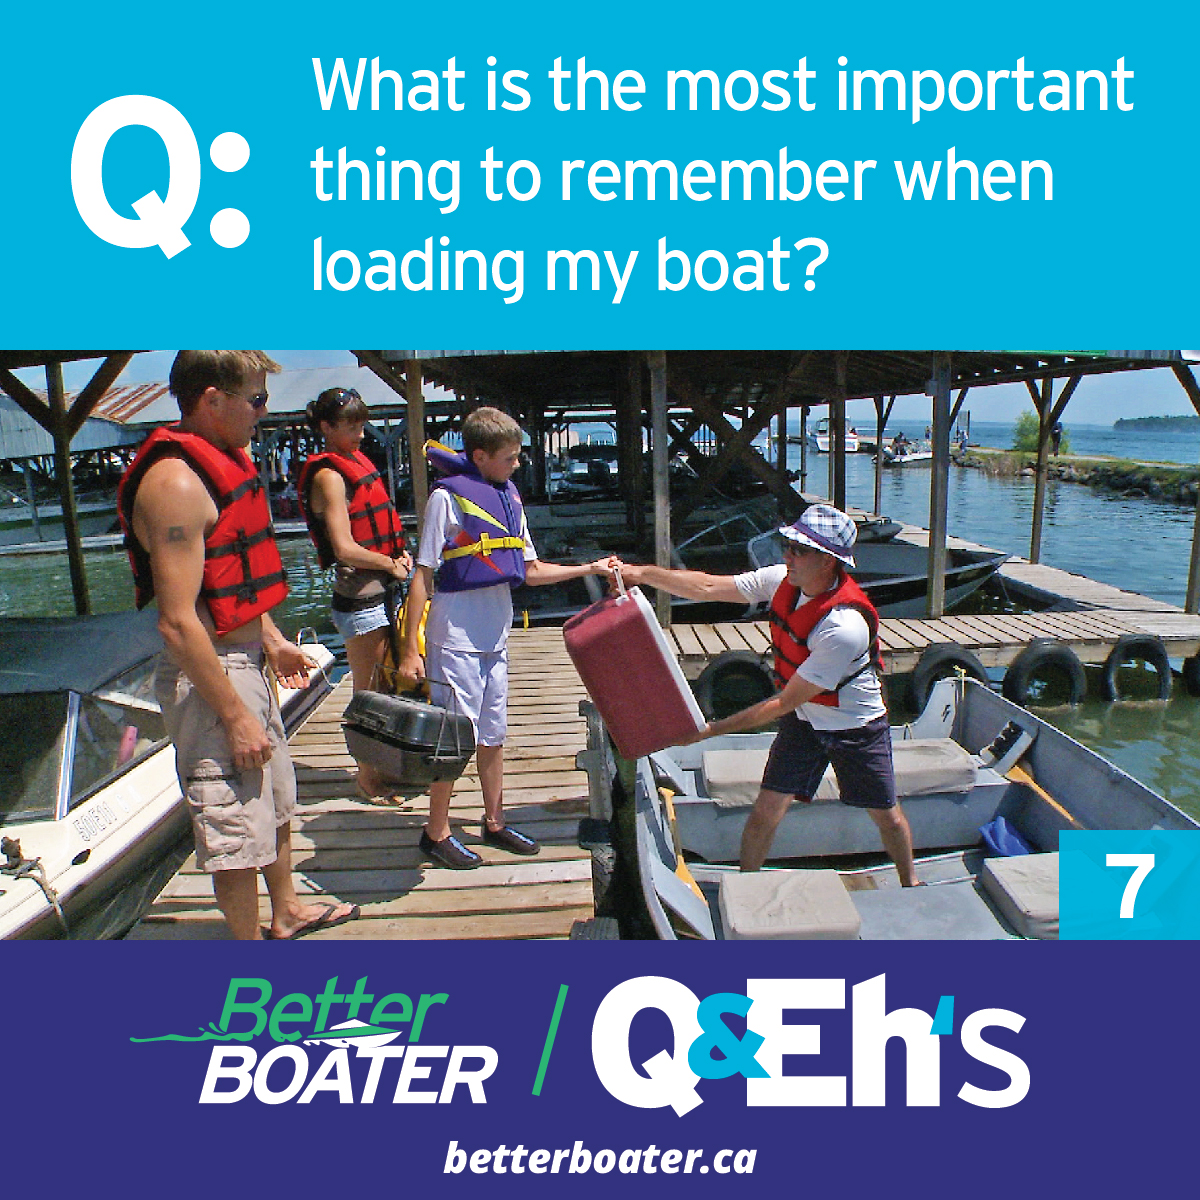 https://betterboater.ca/Q&Eh:%20Loading%20Boat